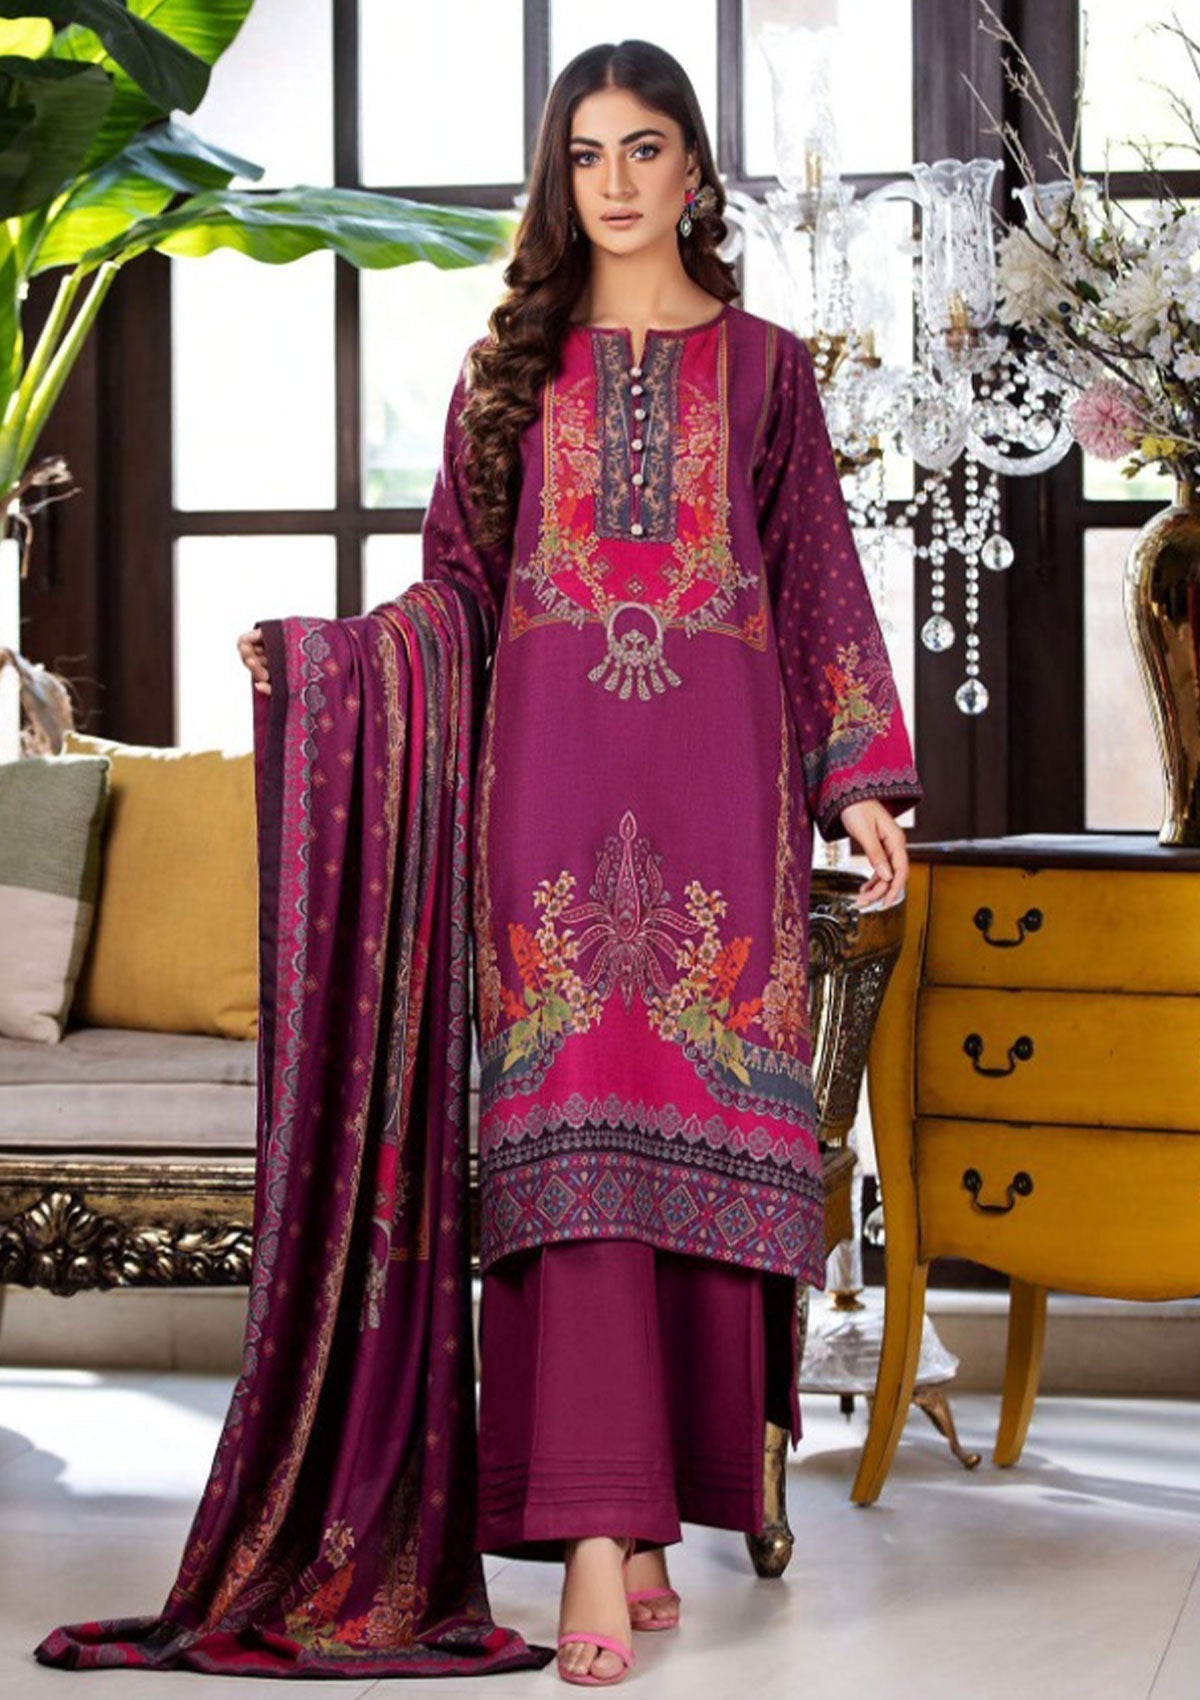 Winter Collection - Noor Jahan - Mina Hassan - D#3 available at Saleem Fabrics Traditions